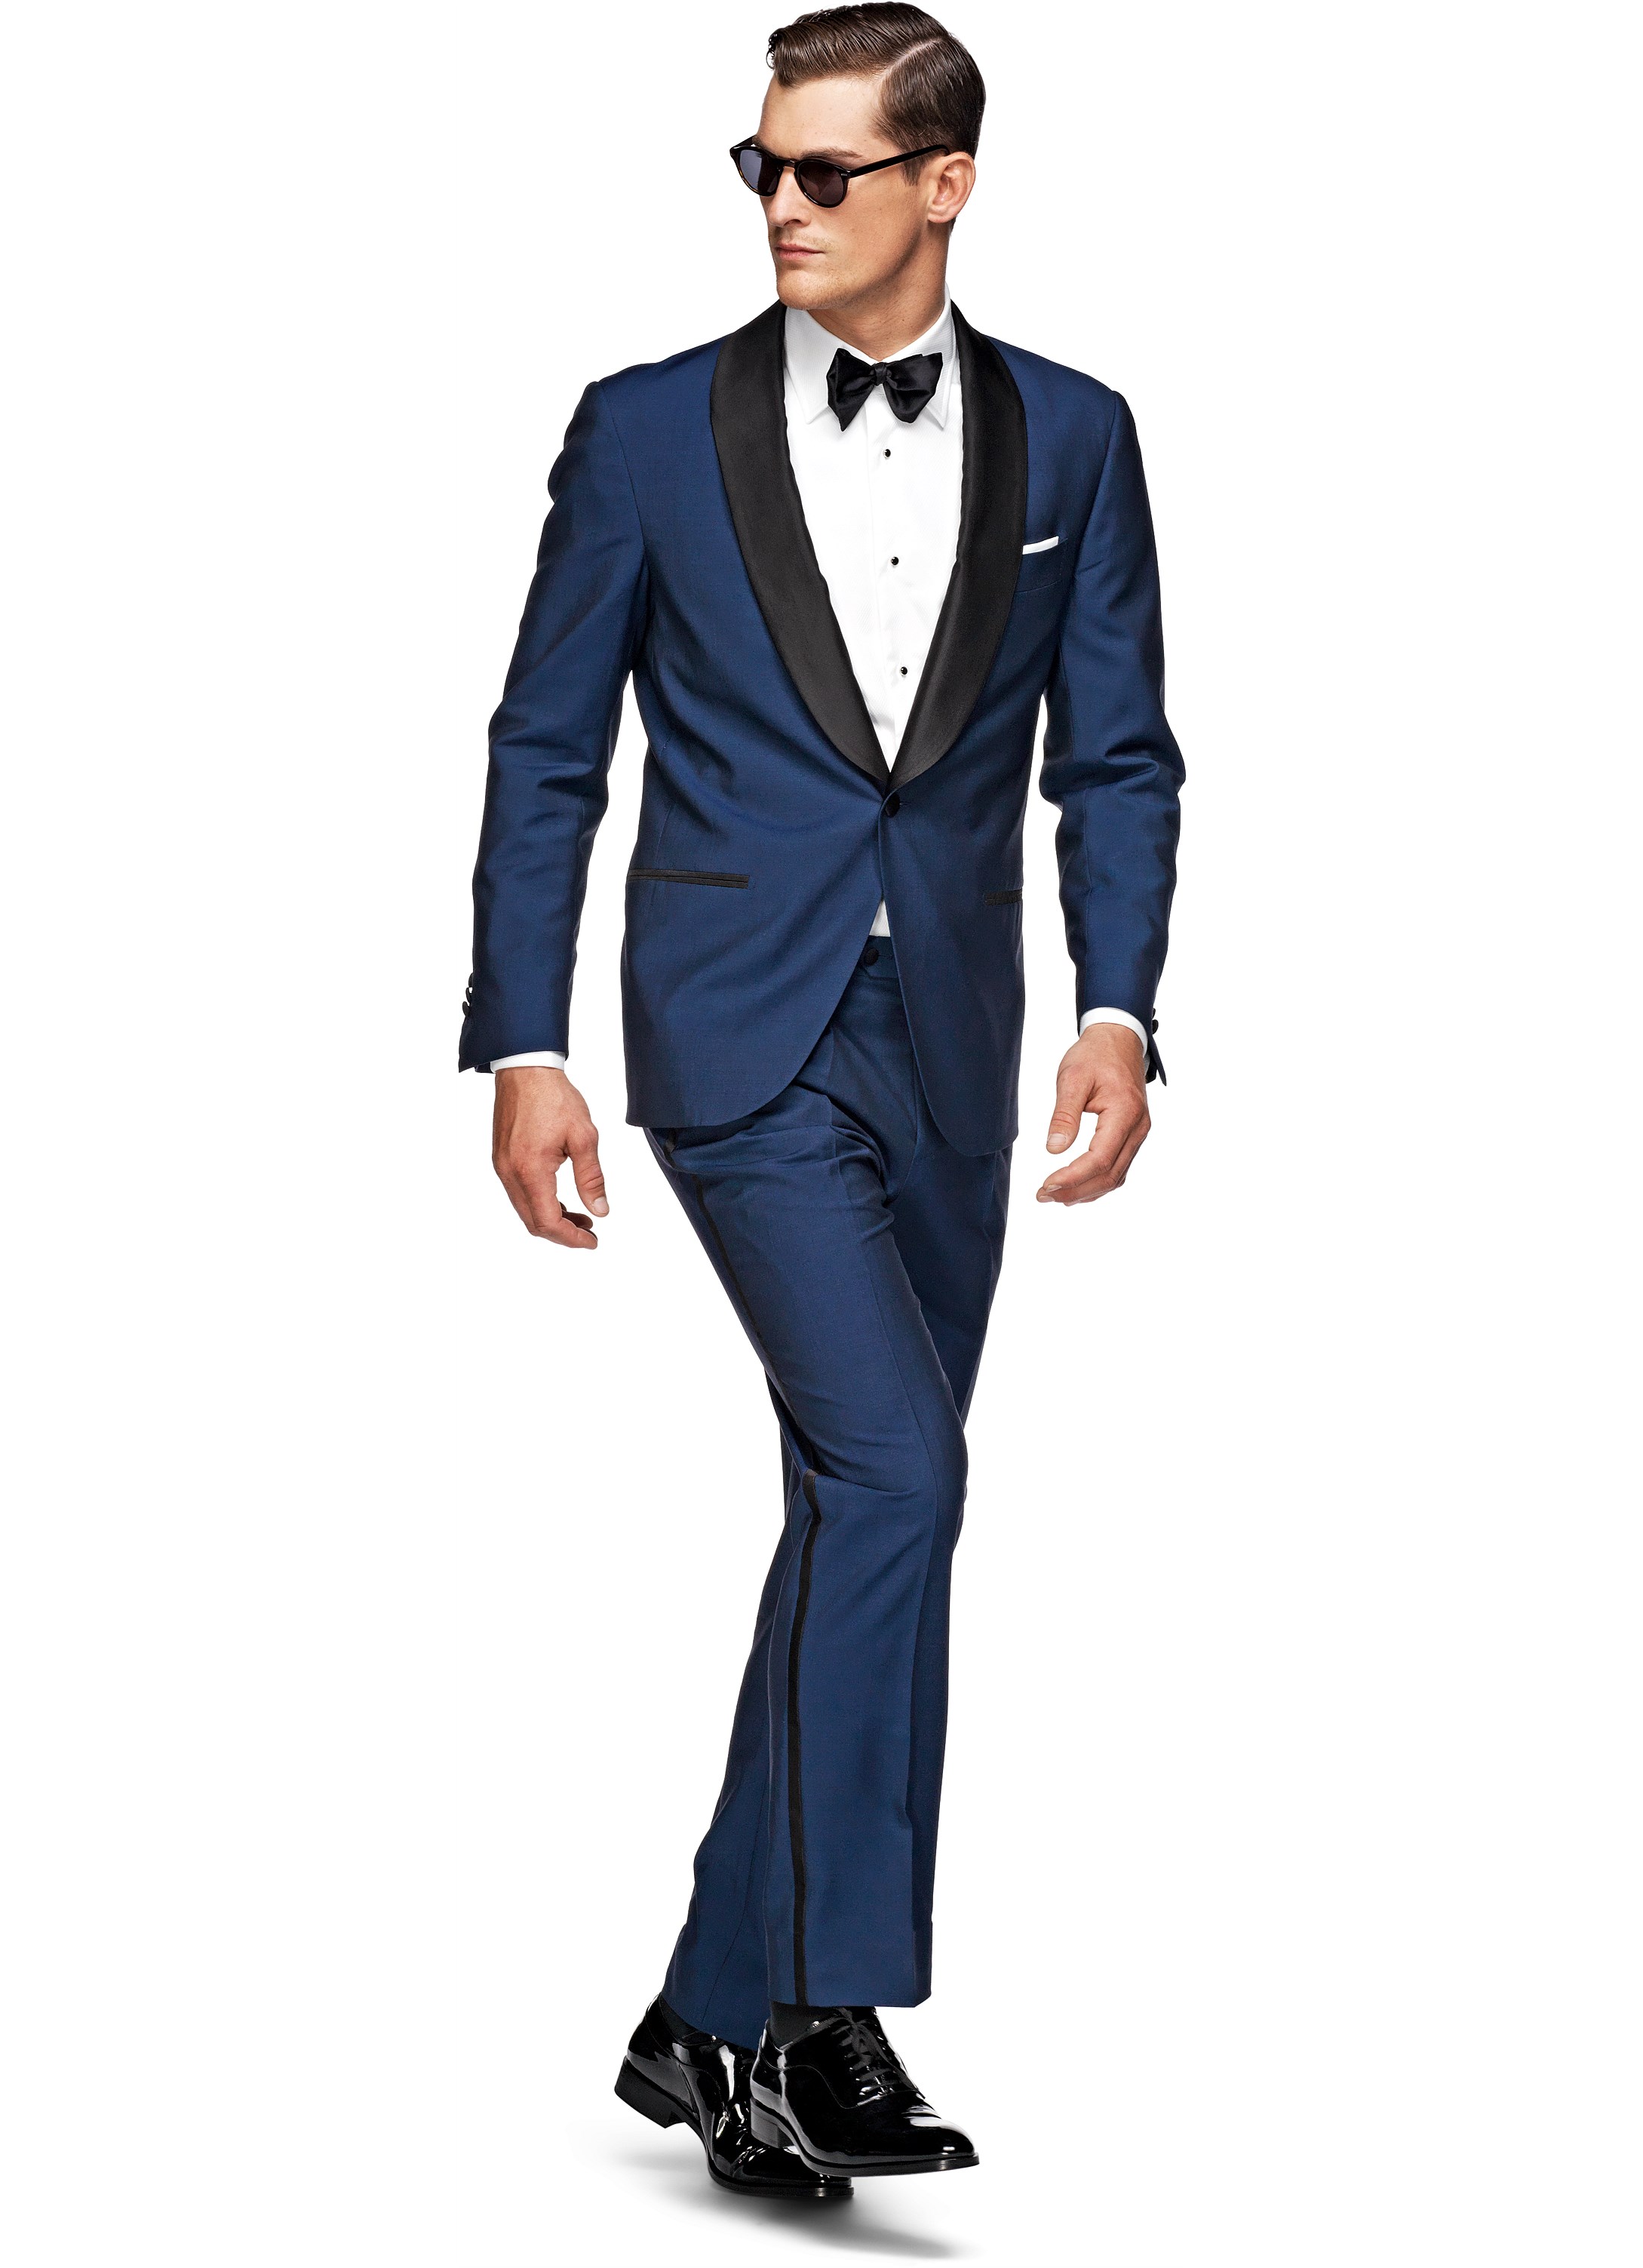 http://statics.suitsupply.com/images/products/Suits/zoom/Suits_Blue_Plain_Tuxedo_P3595_Suitsupply_Online_Store_1.jpg